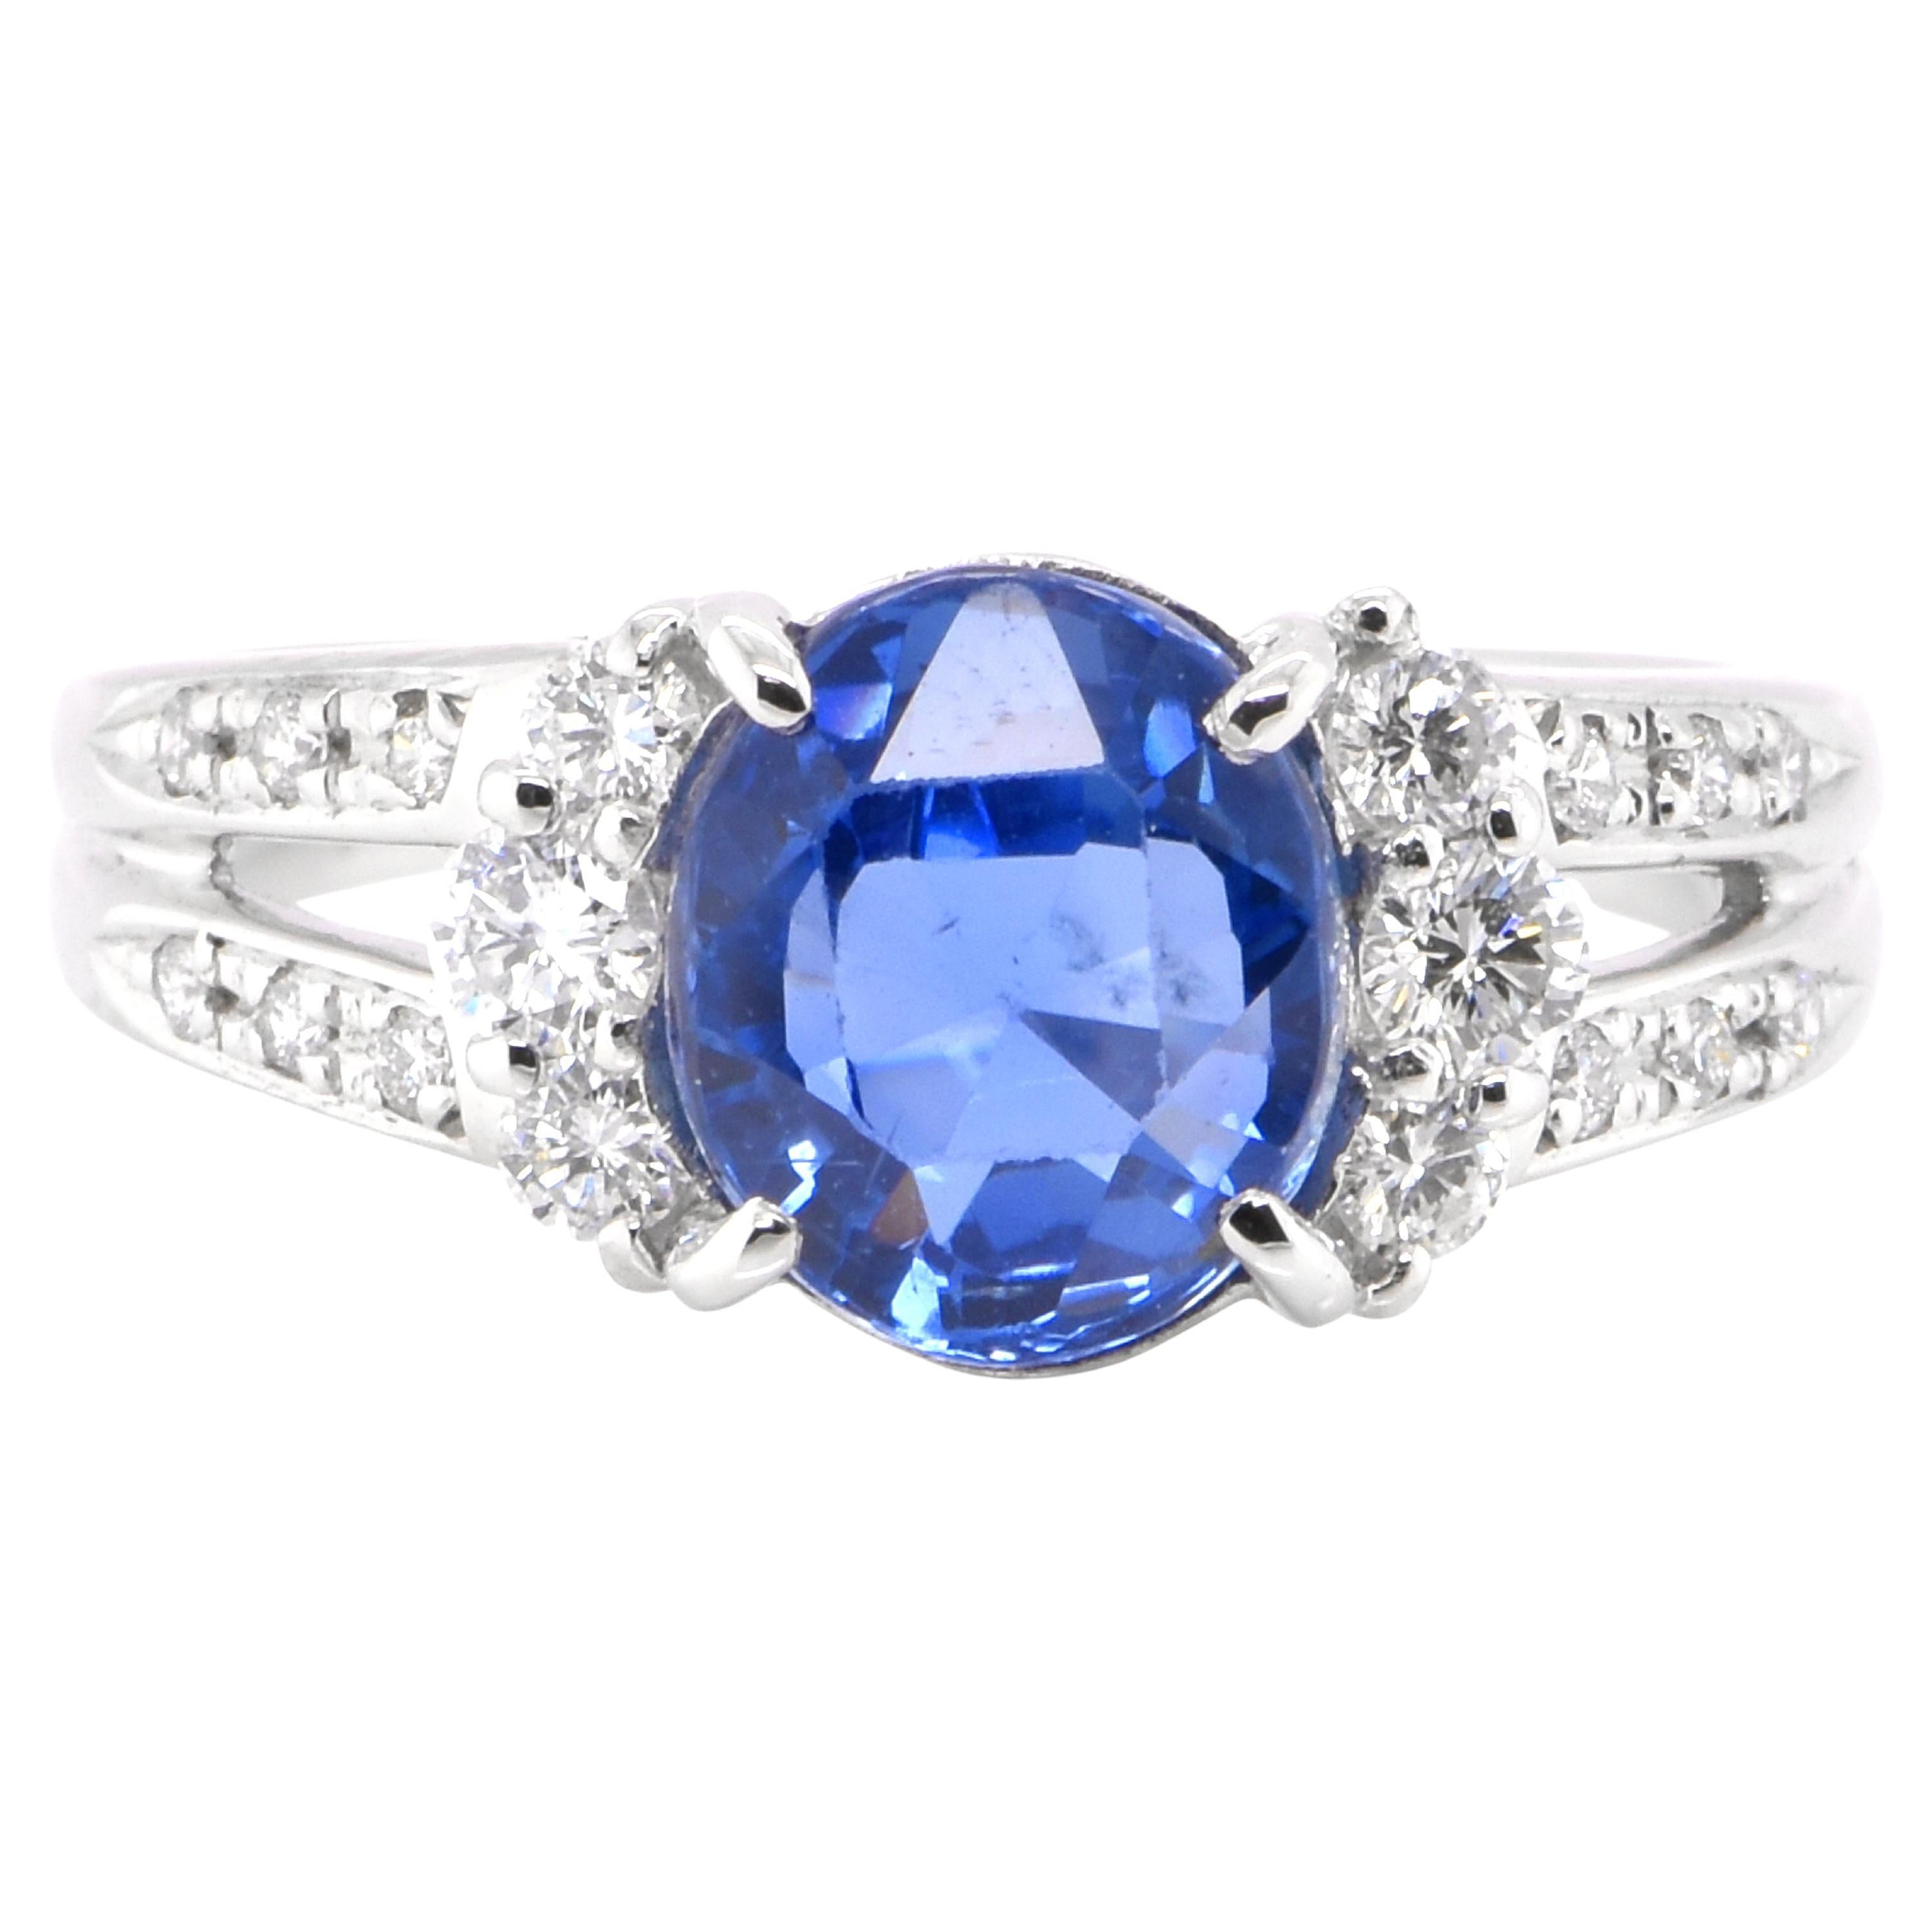 GIA Certified 3.33 Carat Natural Burmese, Unheated Sapphire Ring Set in Platinum For Sale